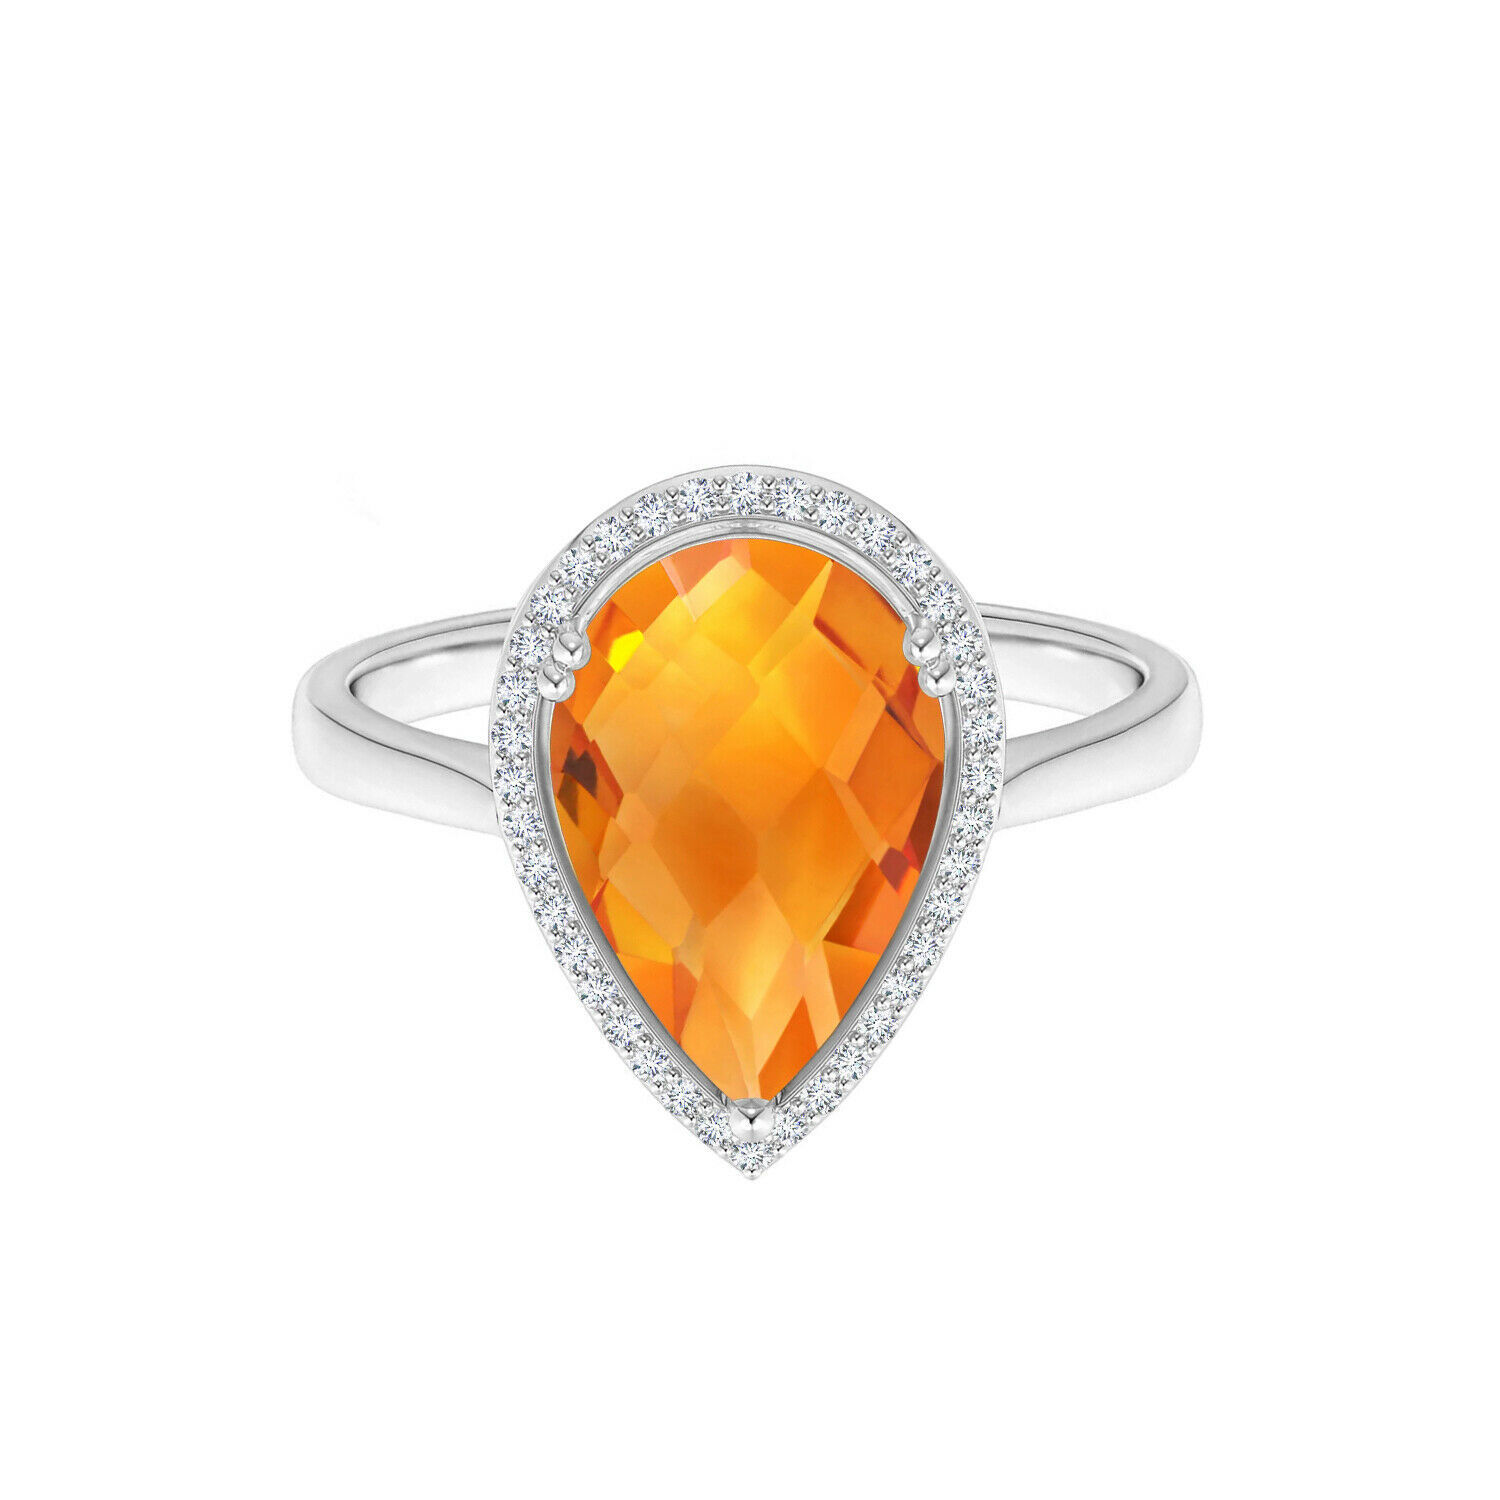 Kimaya Jewel - 8x5 mm pear shaped citrine 1.00 cts 10k white gold solitaire accents ring